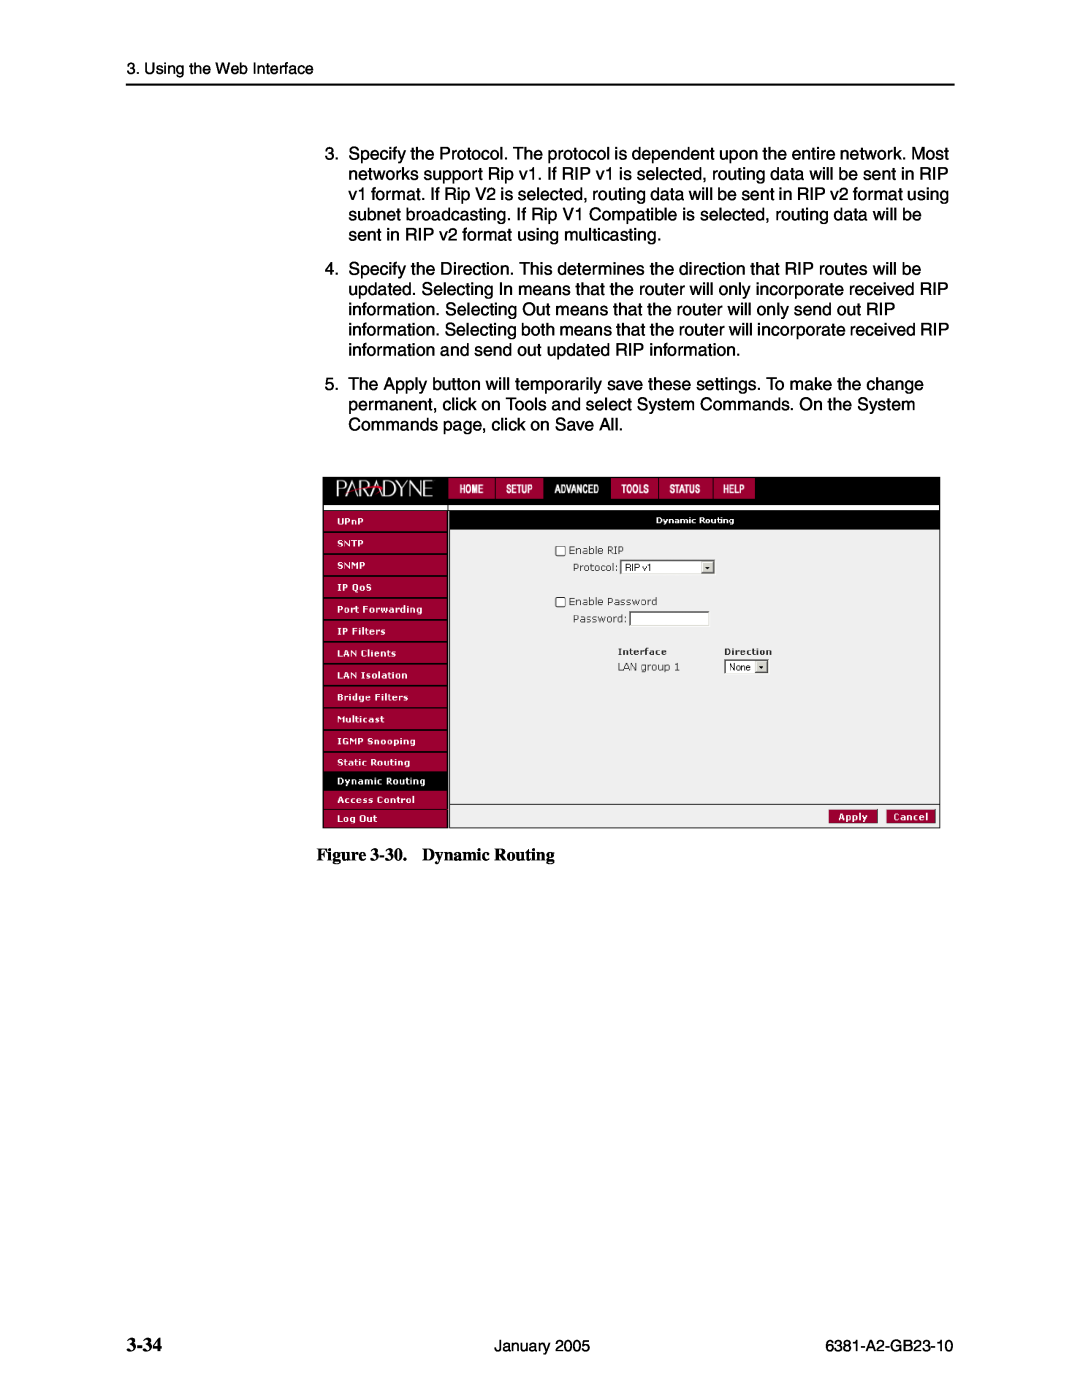 Paradyne 6381-A3 manual 3-34, 30. Dynamic Routing, Using the Web Interface, January 